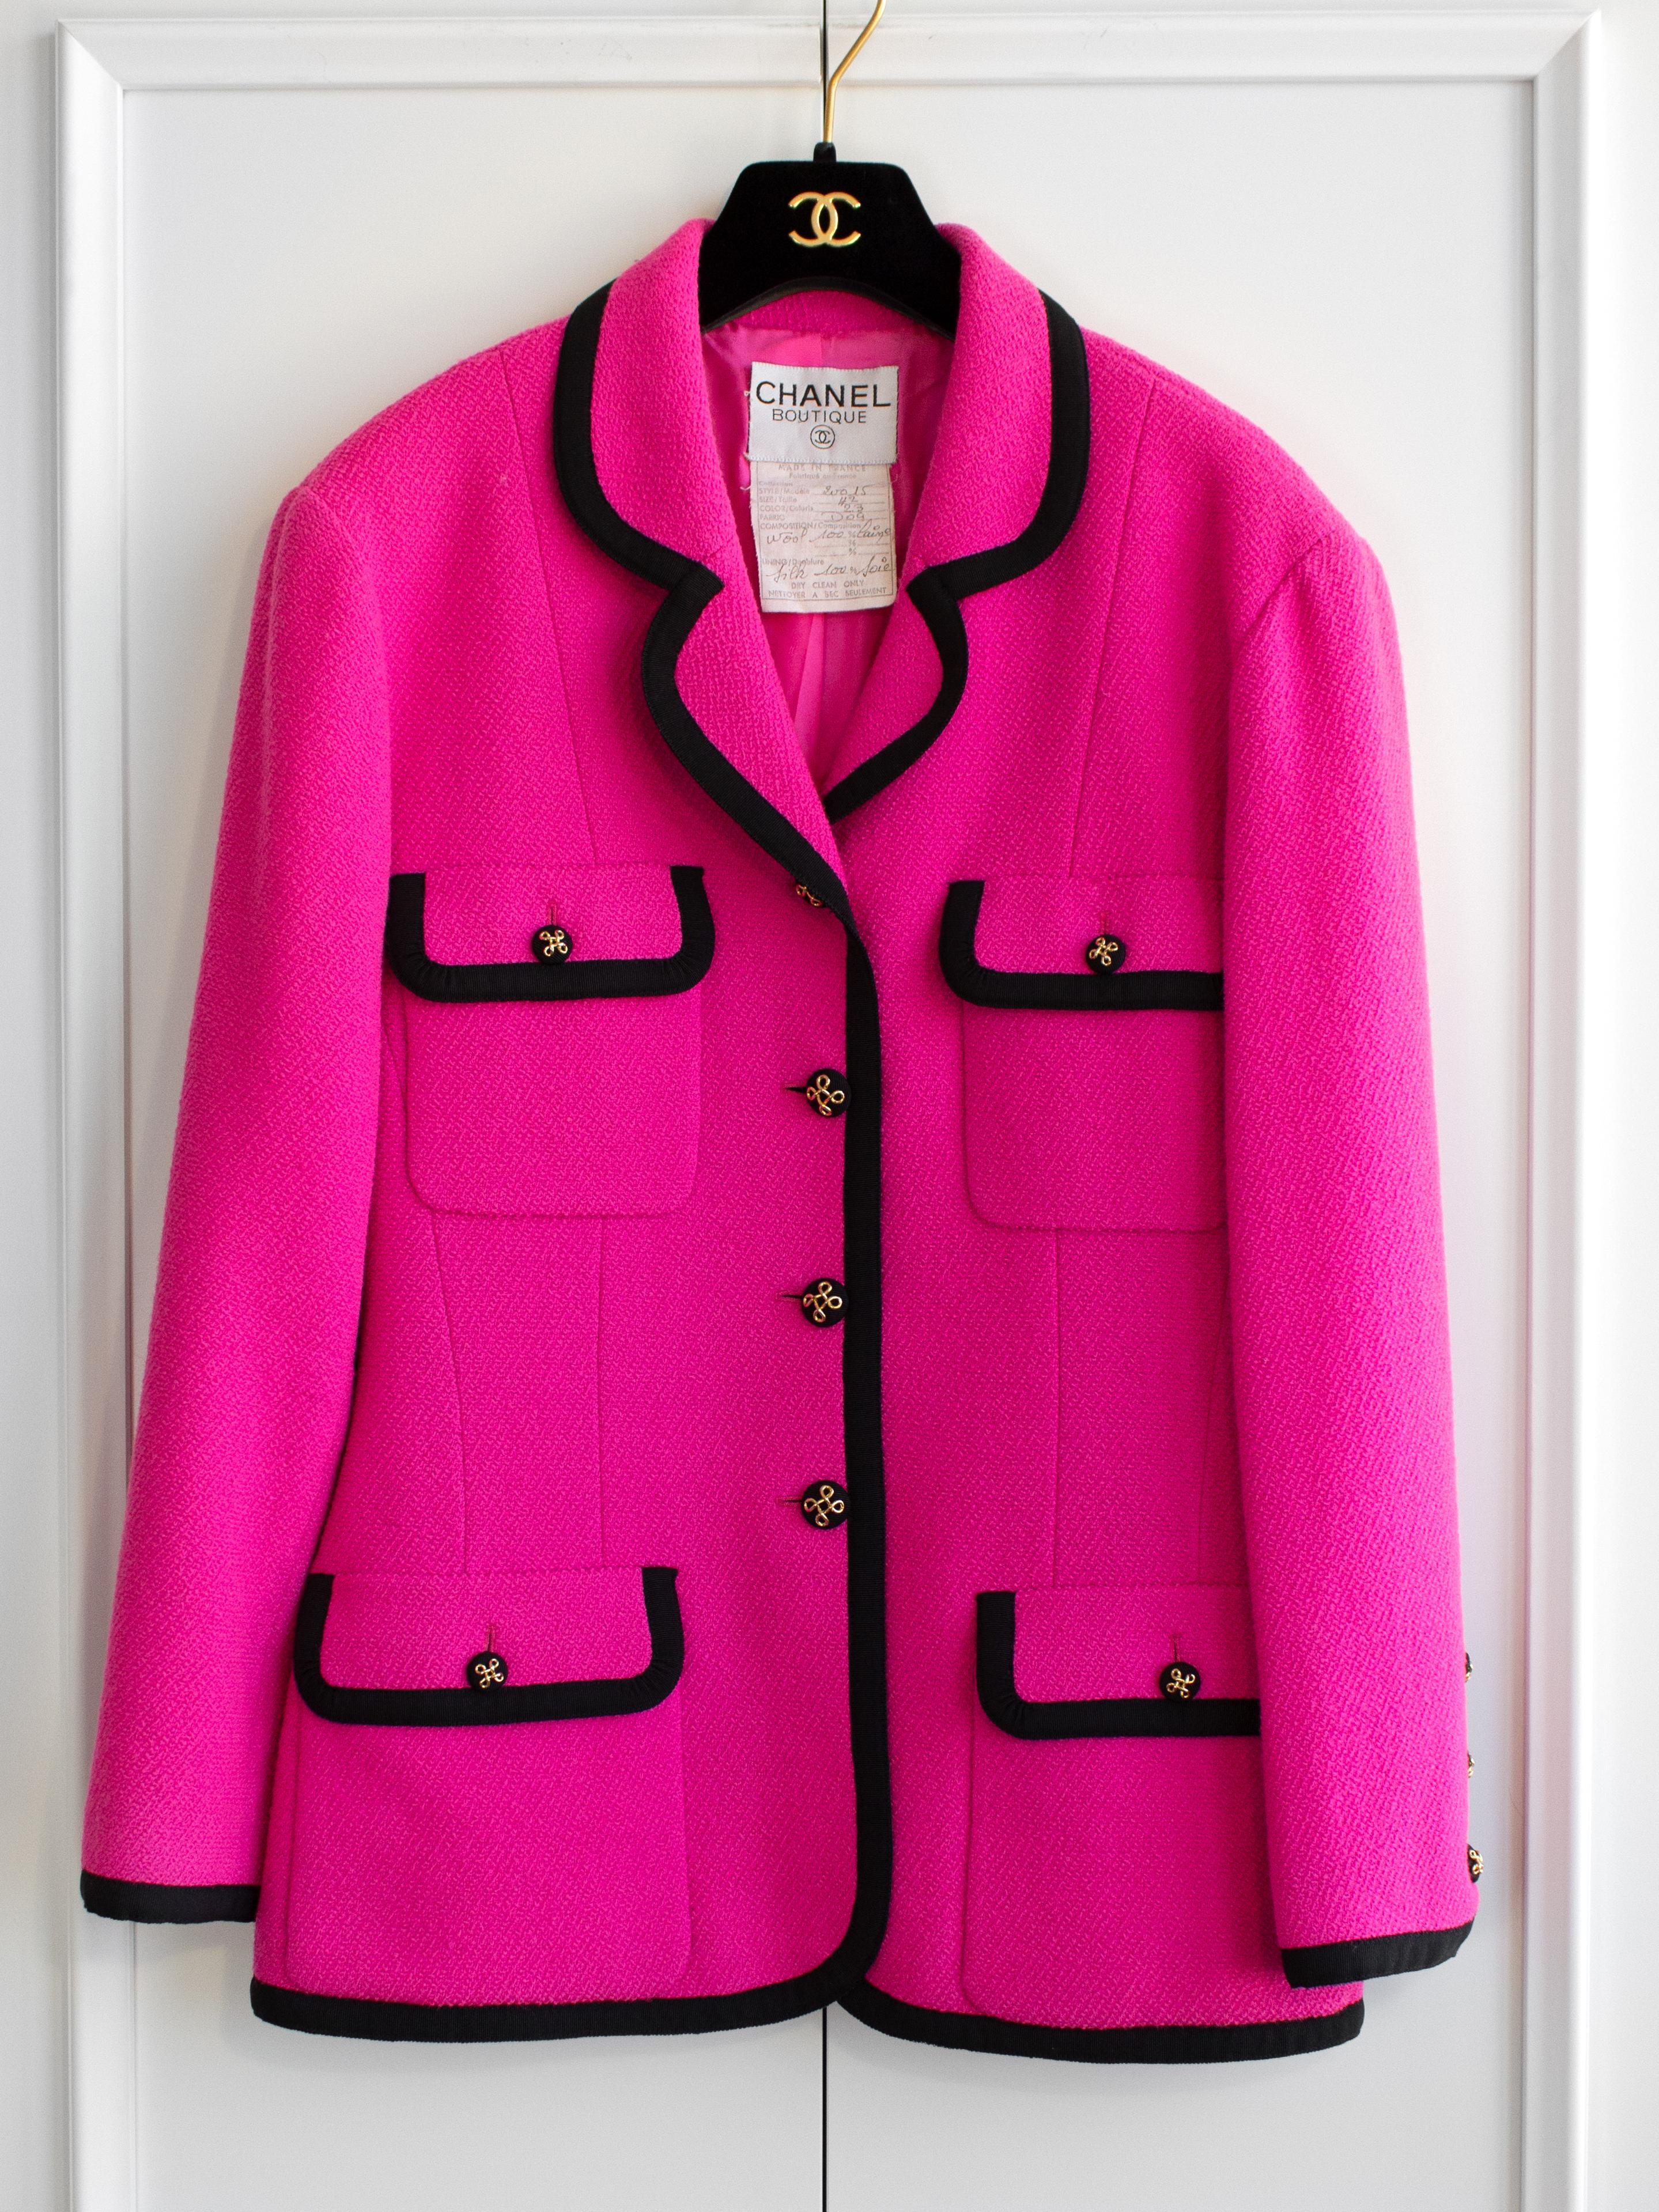 Chanel Vintage S/S 1991 Collector Fuchsia Pink Black Wool Jacket Skirt Suit For Sale 1